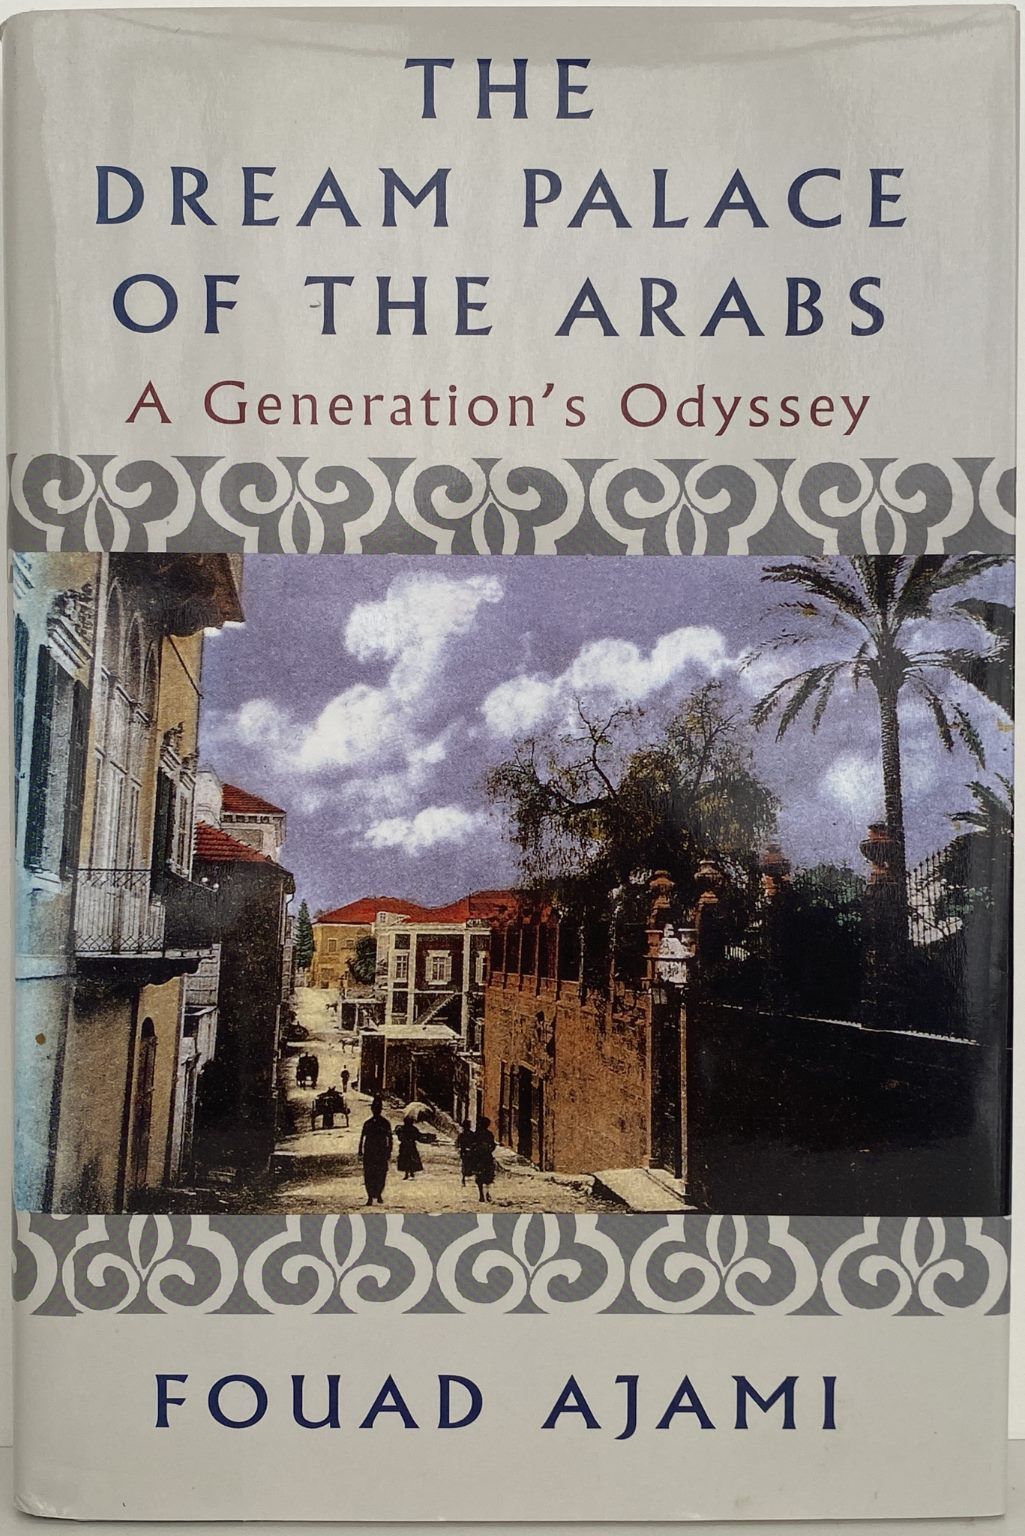 THE DREAM PALACE OF THE ARABS: A Generation's Odyssey